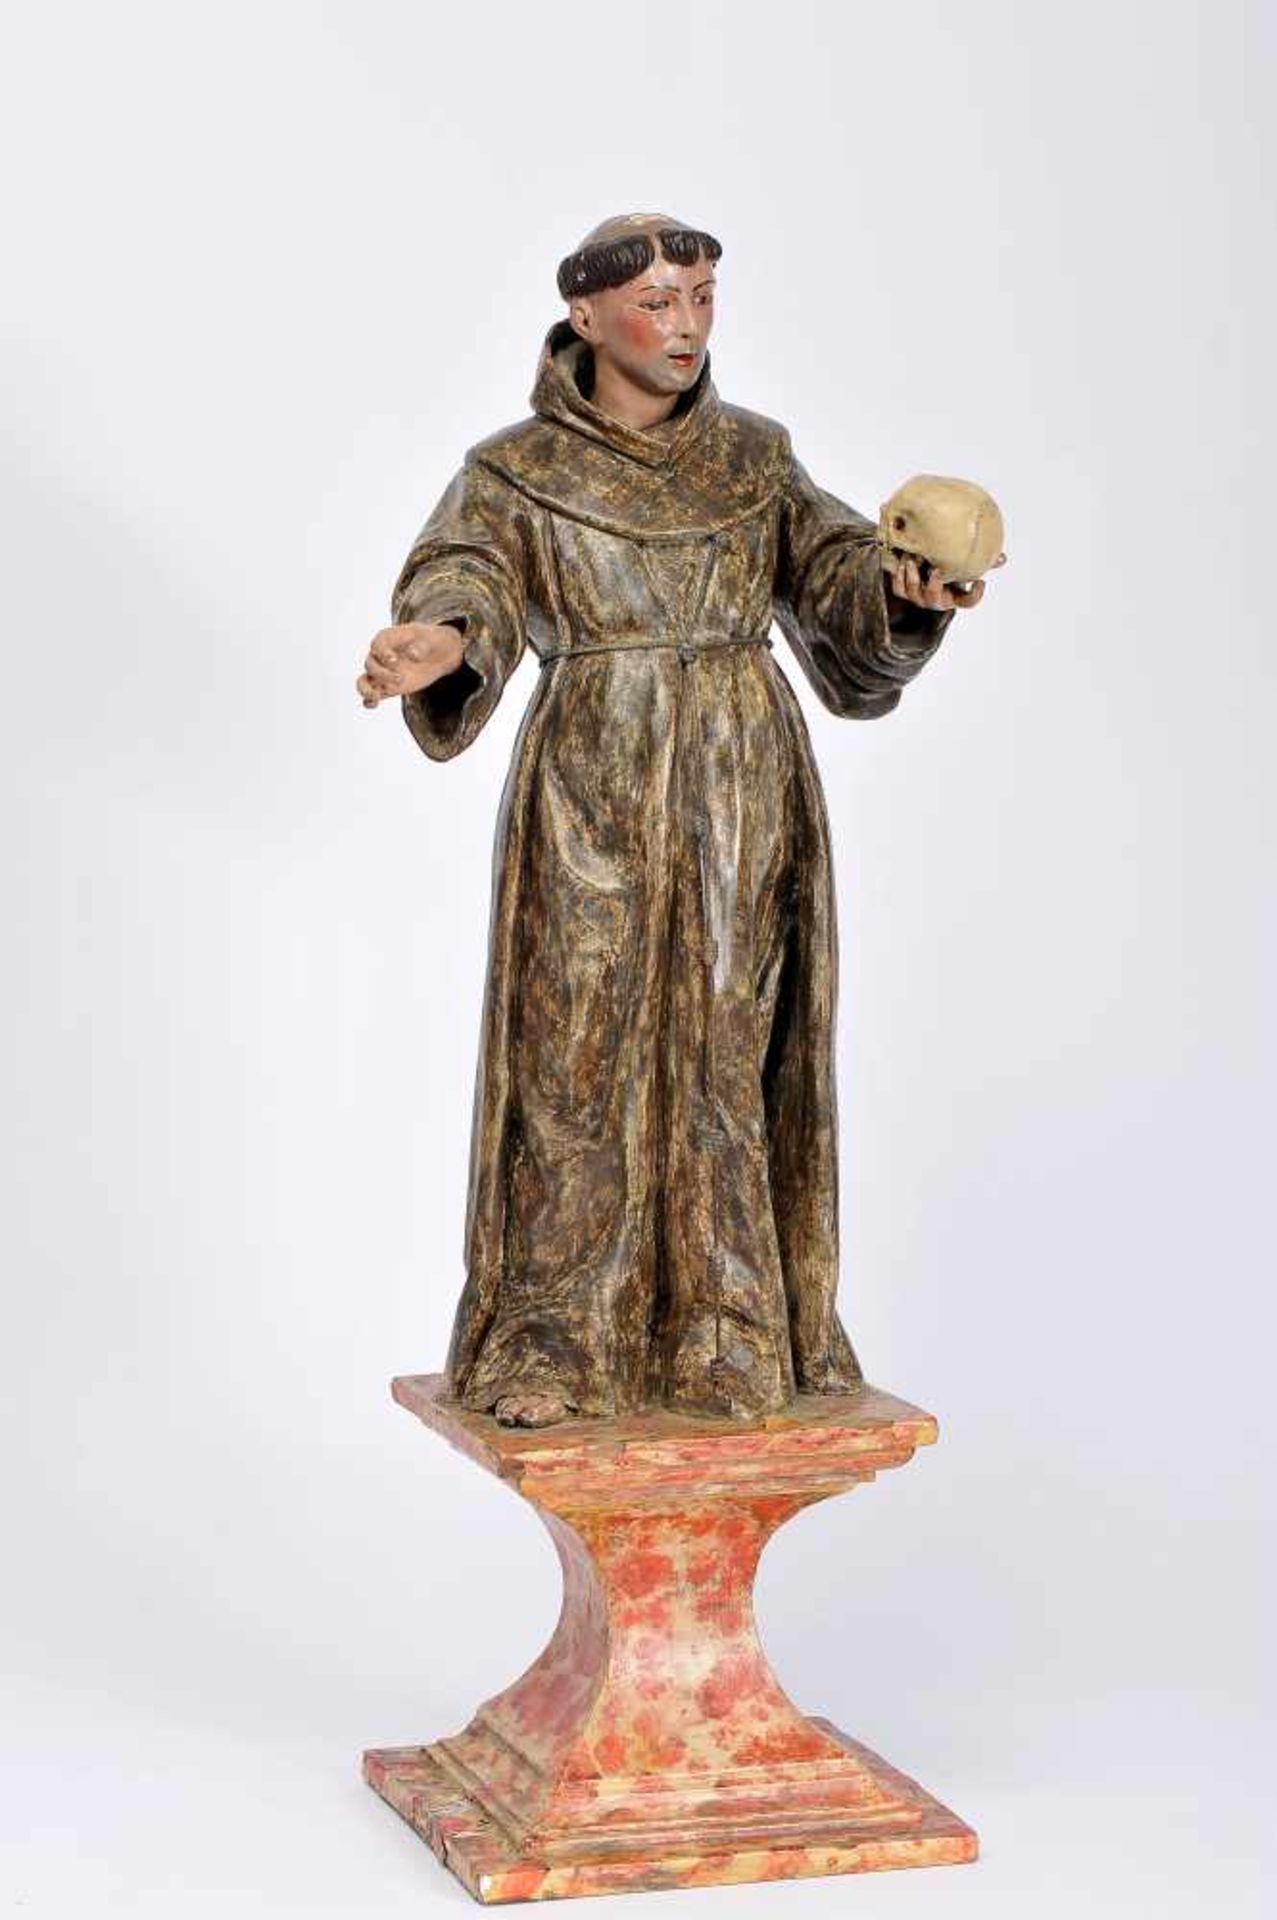 Saint Francis of Assisi, polychrome wooden carving, Spanish School of Granada, 17th C., ink fault on